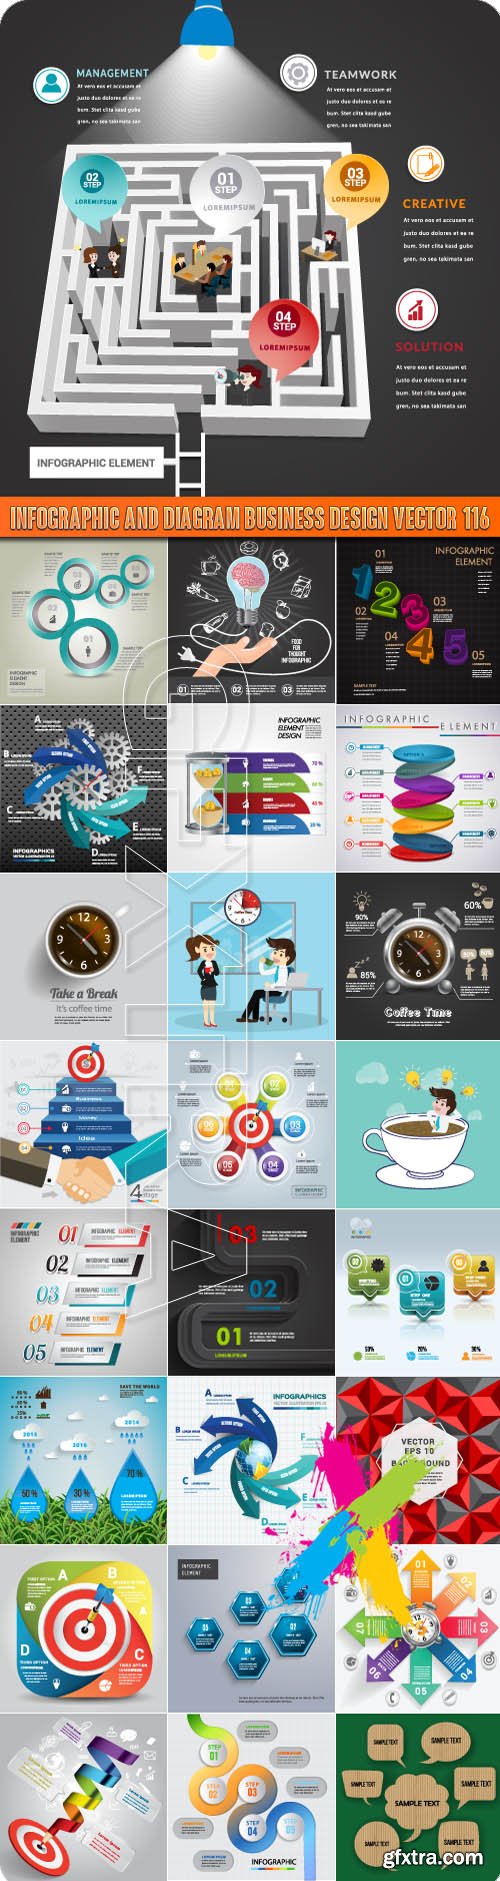 Infographic and diagram business design vector 116